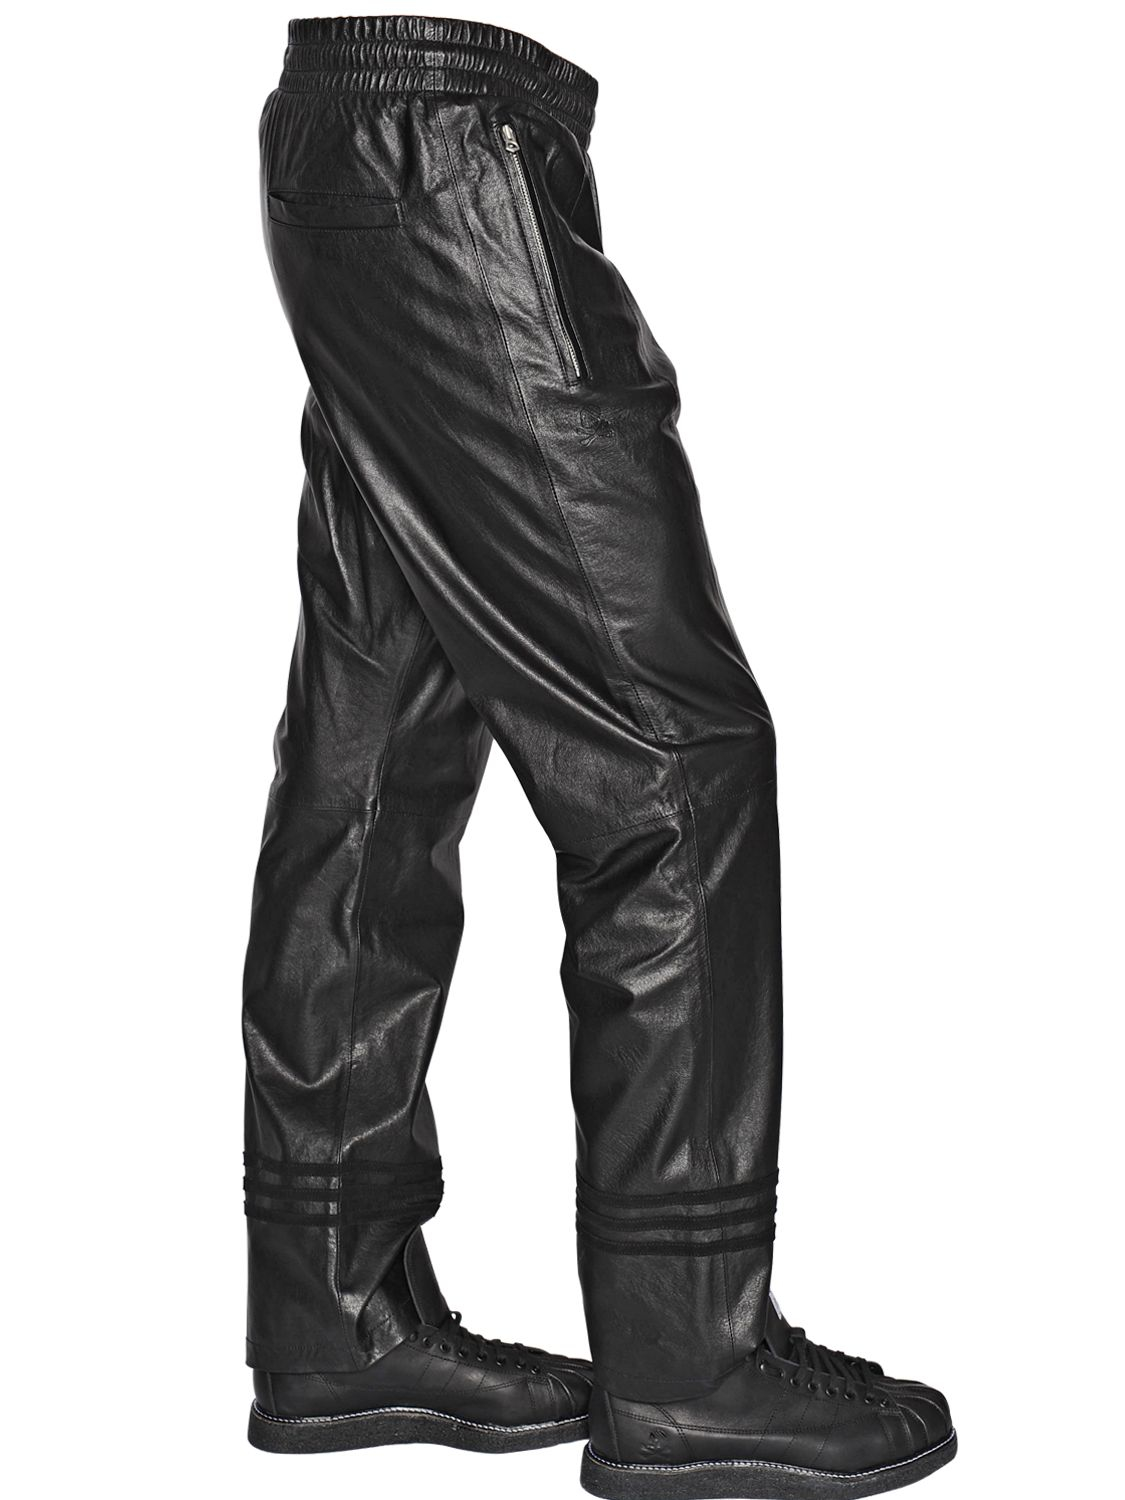 Lyst - Adidas Originals Straight Leather Pants in Black for Men